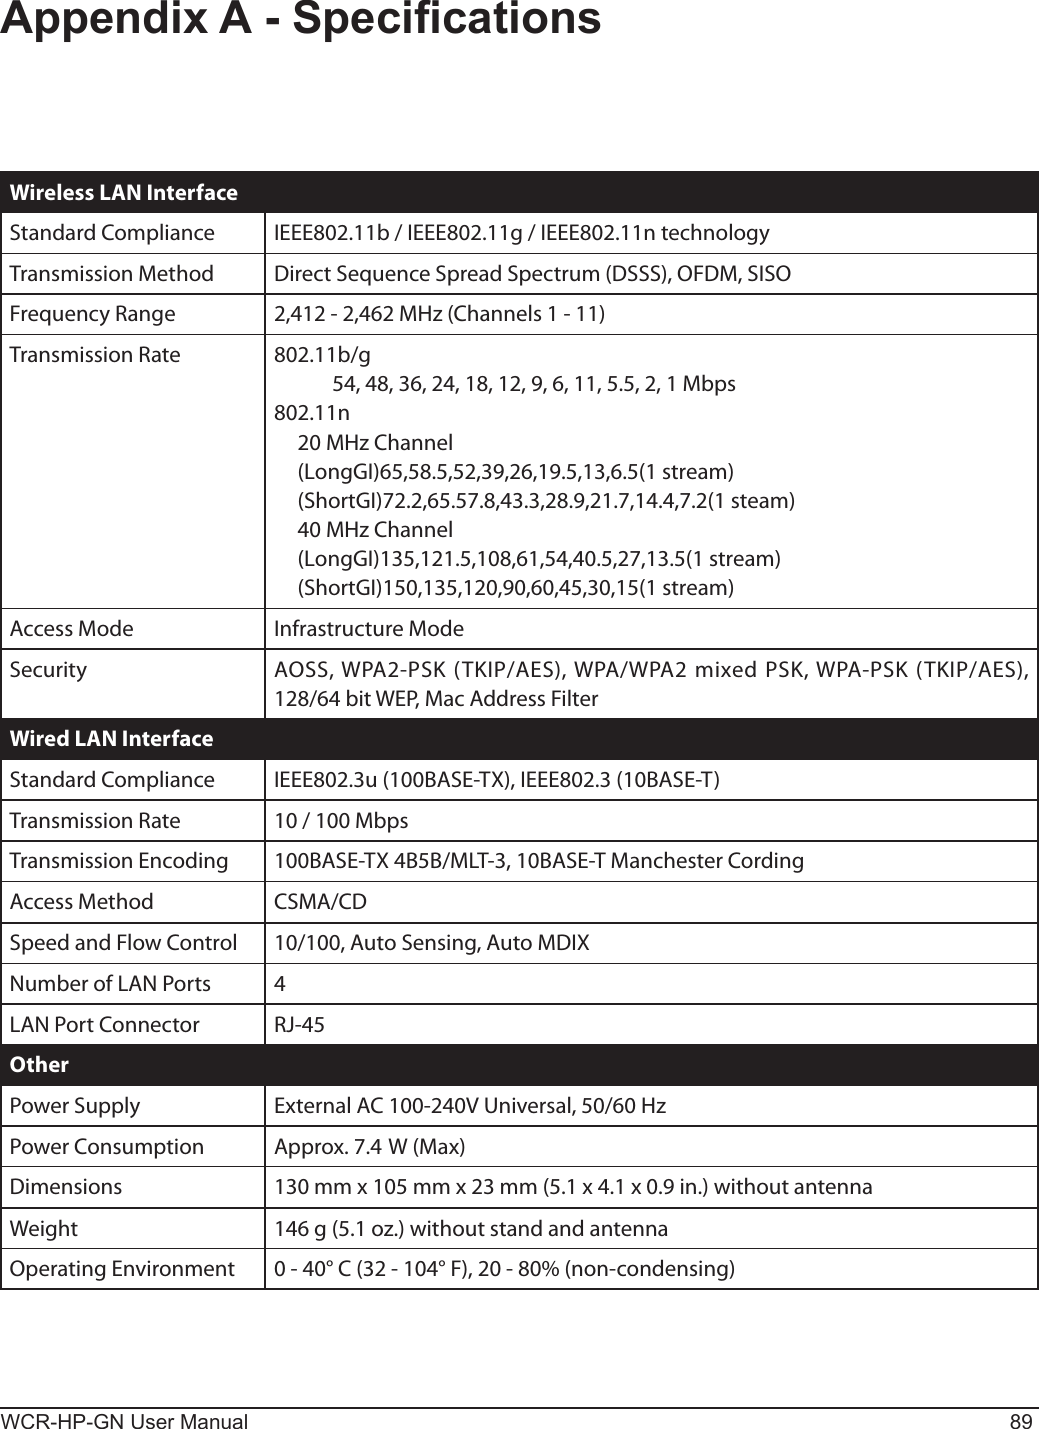 WCR-HP-GN User Manual 89Appendix A - SpecicationsWireless LAN InterfaceStandard Compliance IEEE802.11b / IEEE802.11g / IEEE802.11n technologyTransmission Method Direct Sequence Spread Spectrum (DSSS), OFDM, SISOFrequency Range 2,412 - 2,462 MHz (Channels 1 - 11)Transmission Rate 802.11b/g    54, 48, 36, 24, 18, 12, 9, 6, 11, 5.5, 2, 1 Mbps802.11n  20 MHz Channel  (LongGI)65,58.5,52,39,26,19.5,13,6.5(1 stream)  (ShortGI)72.2,65.57.8,43.3,28.9,21.7,14.4,7.2(1 steam)  40 MHz Channel  (LongGI)135,121.5,108,61,54,40.5,27,13.5(1 stream)  (ShortGI)150,135,120,90,60,45,30,15(1 stream)Access Mode Infrastructure ModeSecurity AOSS, WPA2-PSK (TKIP/AES), WPA/WPA2 mixed PSK, WPA-PSK (TKIP/AES), 128/64 bit WEP, Mac Address FilterWired LAN InterfaceStandard Compliance IEEE802.3u (100BASE-TX), IEEE802.3 (10BASE-T)Transmission Rate 10 / 100 MbpsTransmission Encoding 100BASE-TX 4B5B/MLT-3, 10BASE-T Manchester CordingAccess Method CSMA/CDSpeed and Flow Control 10/100, Auto Sensing, Auto MDIXNumber of LAN Ports 4LAN Port Connector RJ-45OtherPower Supply External AC 100-240V Universal, 50/60 HzPower Consumption Approx. 7.4 W (Max)Dimensions 130 mm x 105 mm x 23 mm (5.1 x 4.1 x 0.9 in.) without antennaWeight 146 g (5.1 oz.) without stand and antennaOperating Environment 0 - 40° C (32 - 104° F), 20 - 80% (non-condensing)